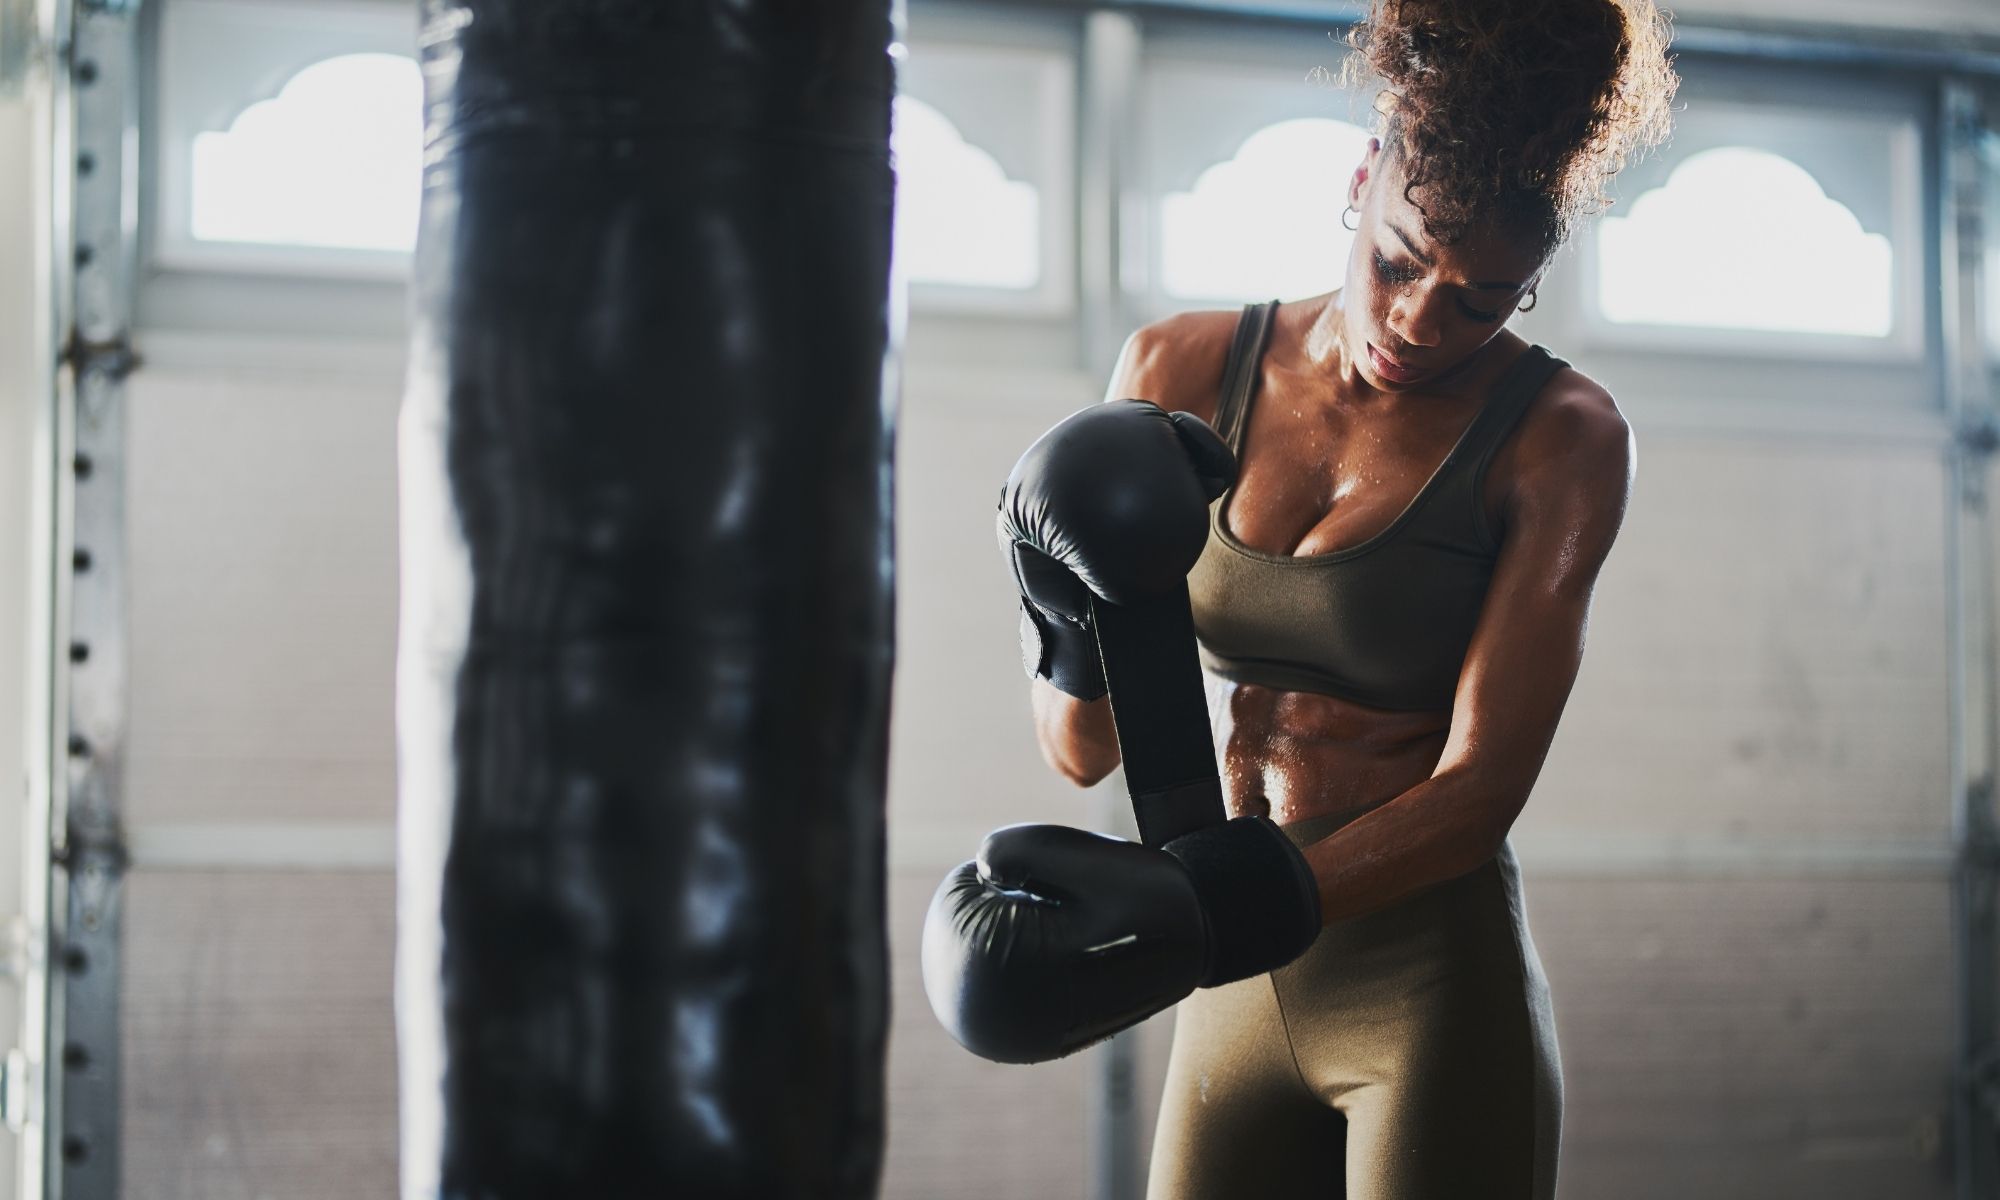 Beautiful woman in her workout clothing boxing, exercising.